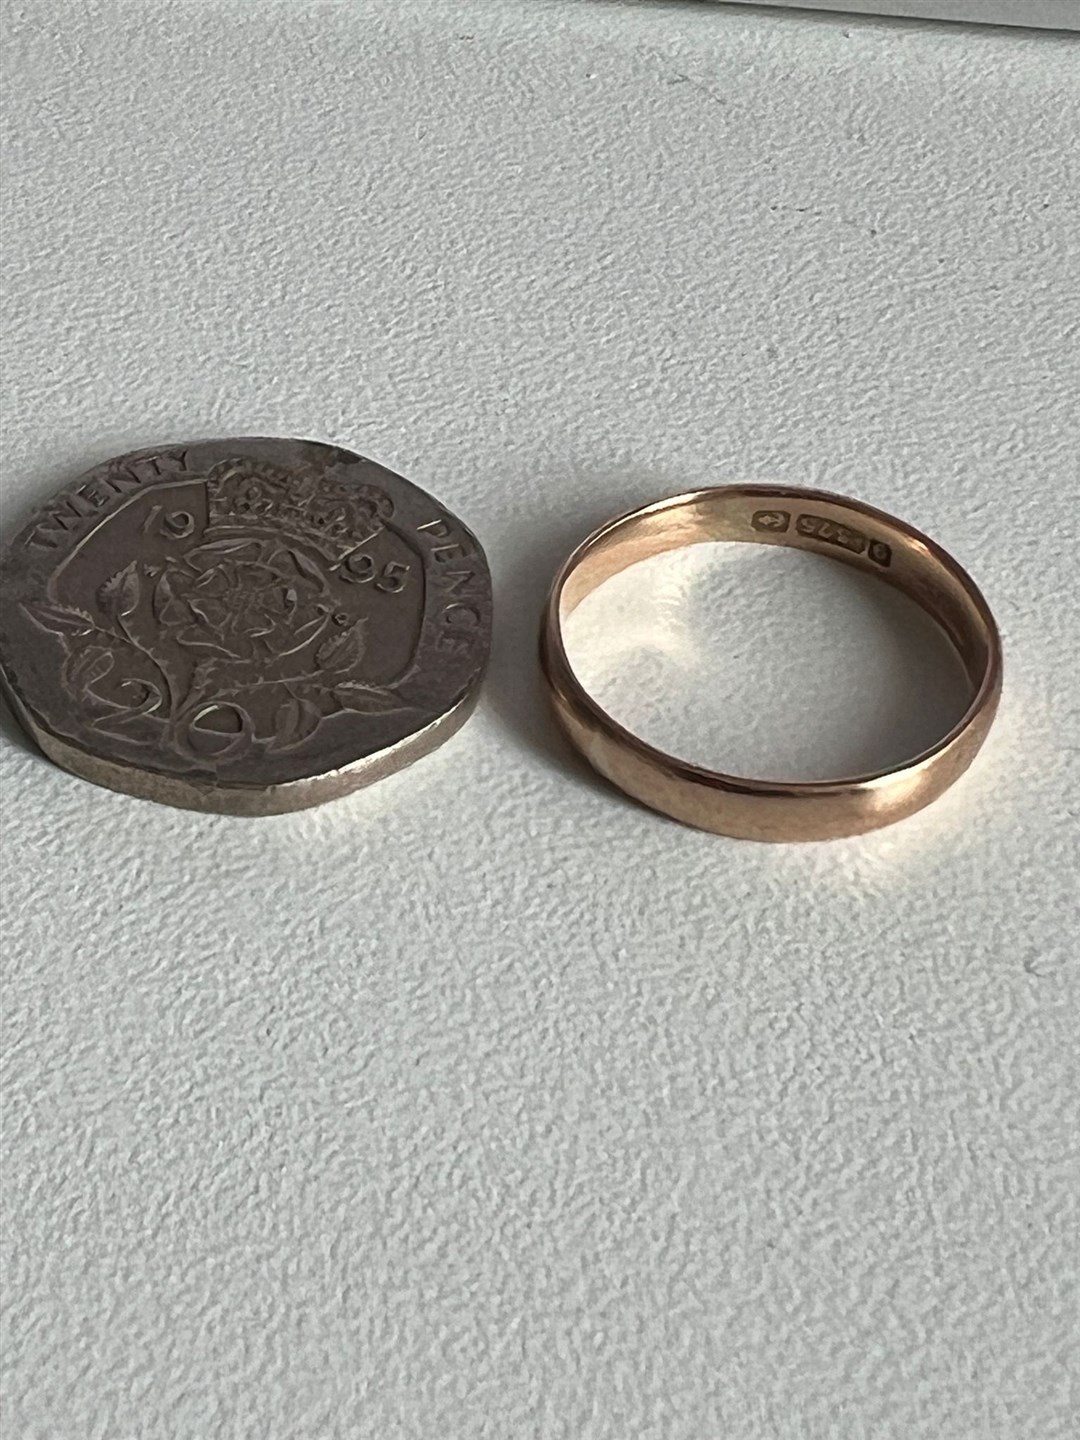 The ring next to a 20p coin (Mike Georgiou/PA)